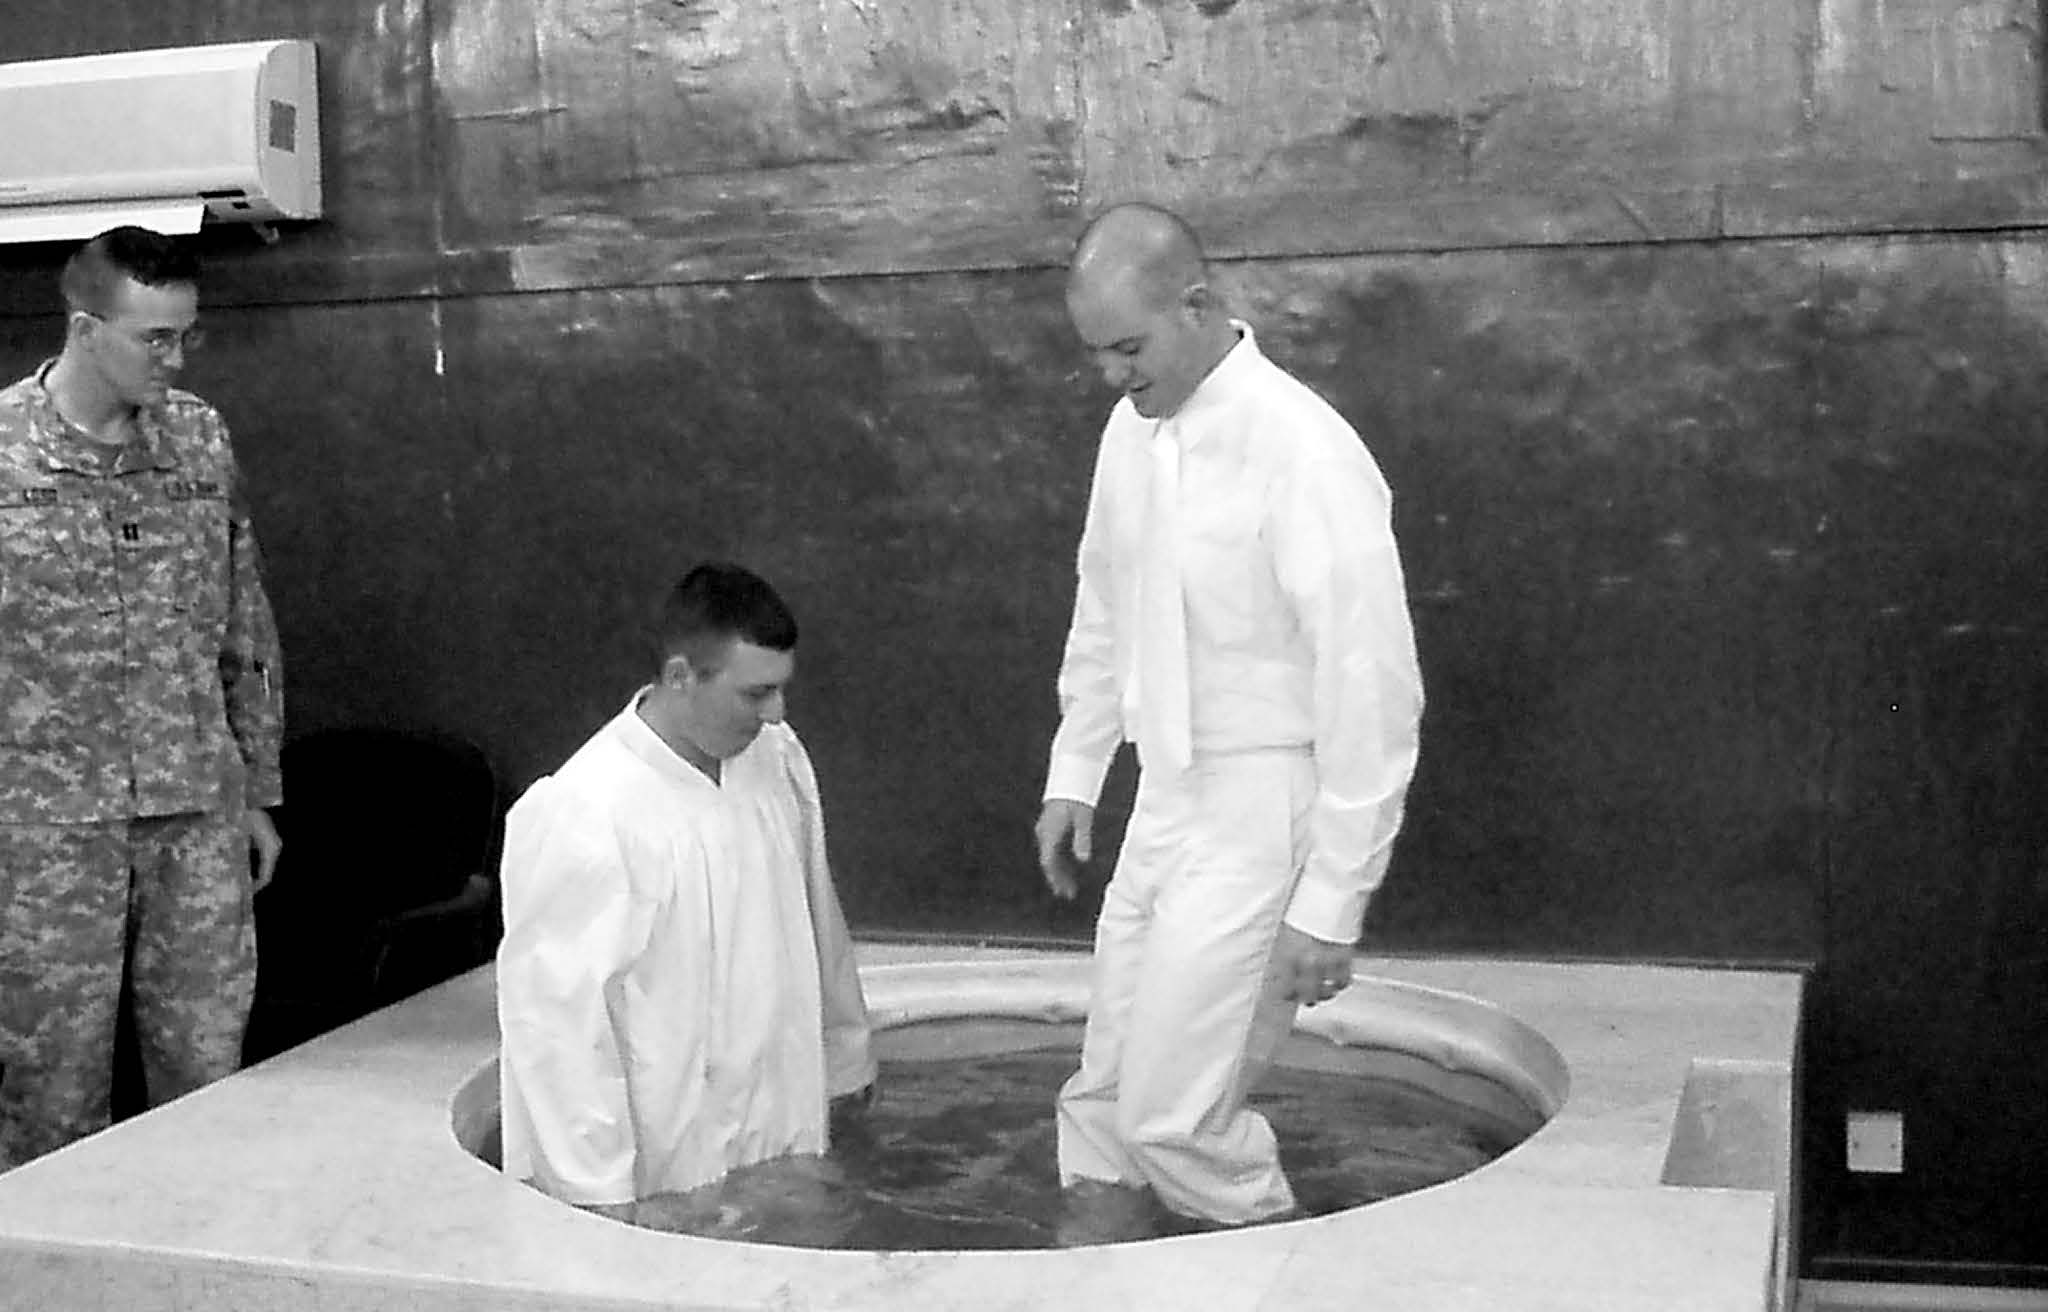 Johnathan Hayes and Ty Lamb prepare for a baptism in the 10th Mountain Division’s Warrior Chapel font at Camp Liberty, Baghdad, on July 12, 2006. Camp firemen filled the font prior to the service. Courtesy of Jon Petty.